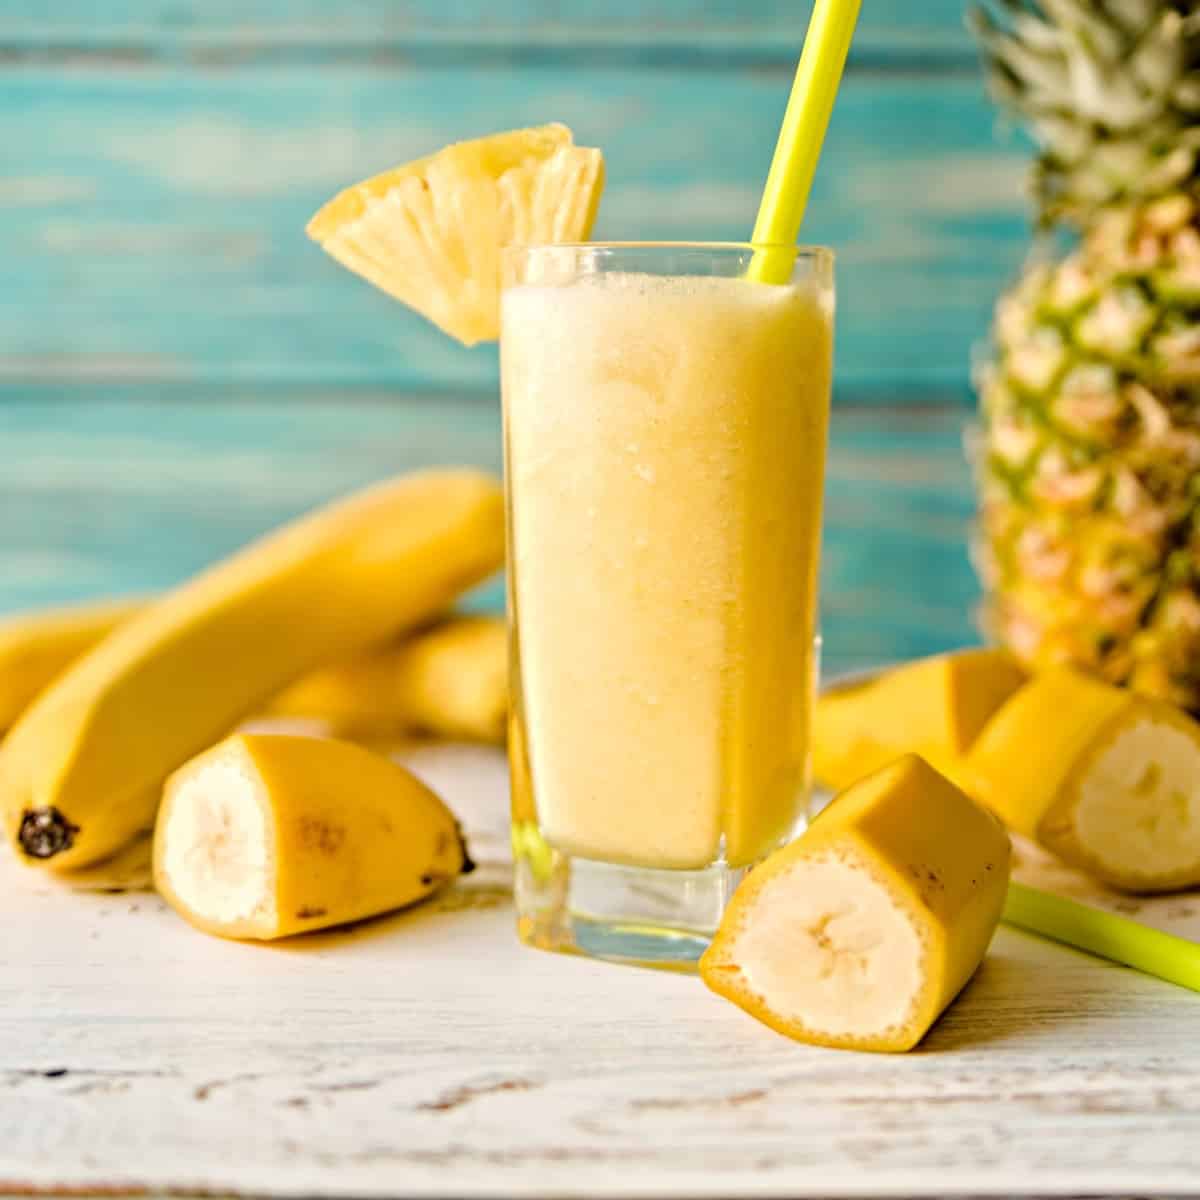 banana pineapple smoothie in a glass